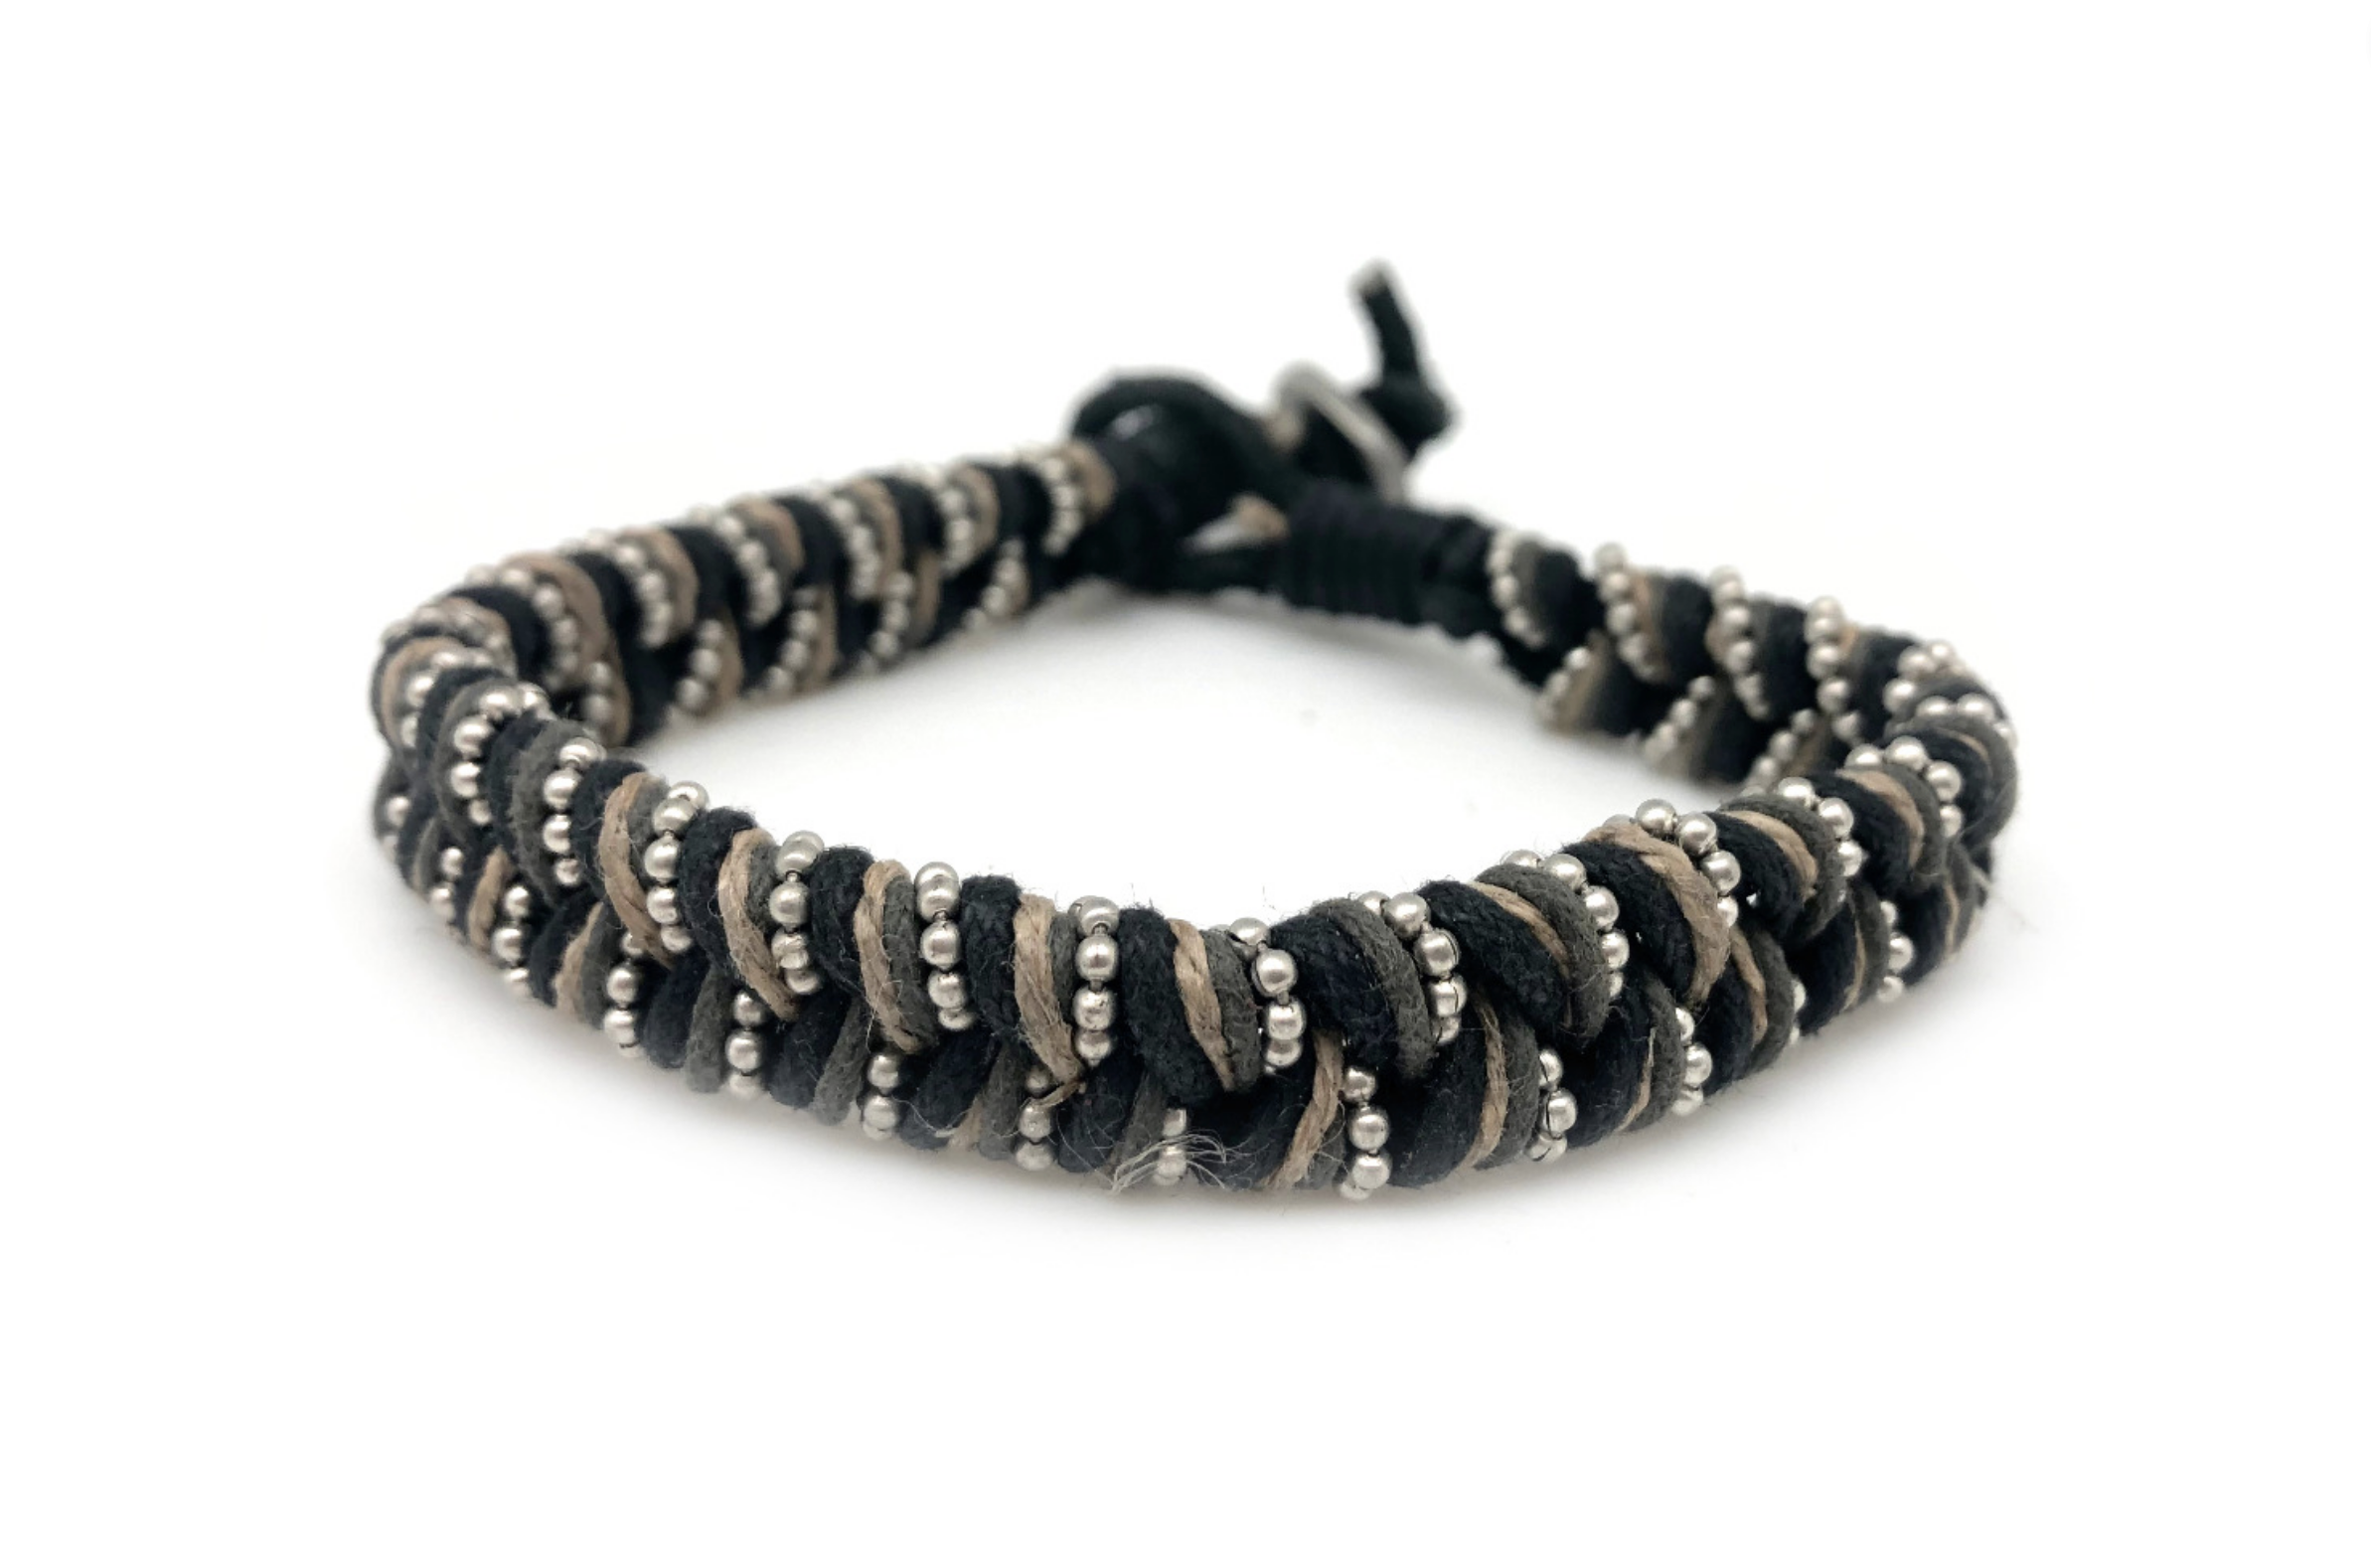 Aadi Twisted Leather & Jute with Silver Beads Men's Bracelet